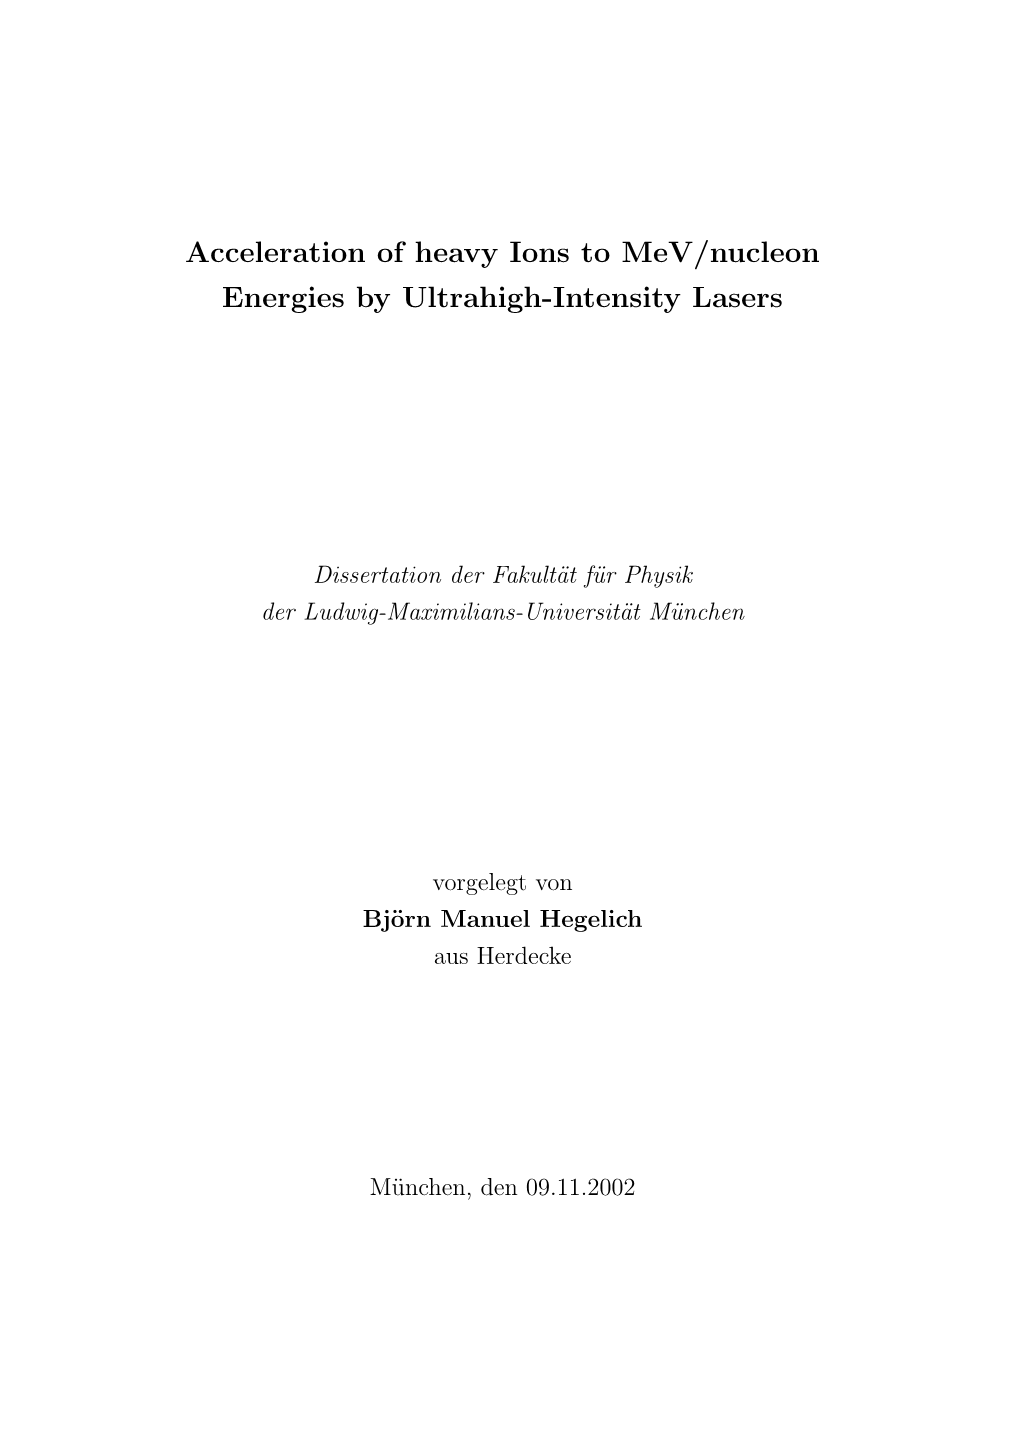 Acceleration of Heavy Ions to Mev/Nucleon Energies by Ultrahigh-Intensity Lasers